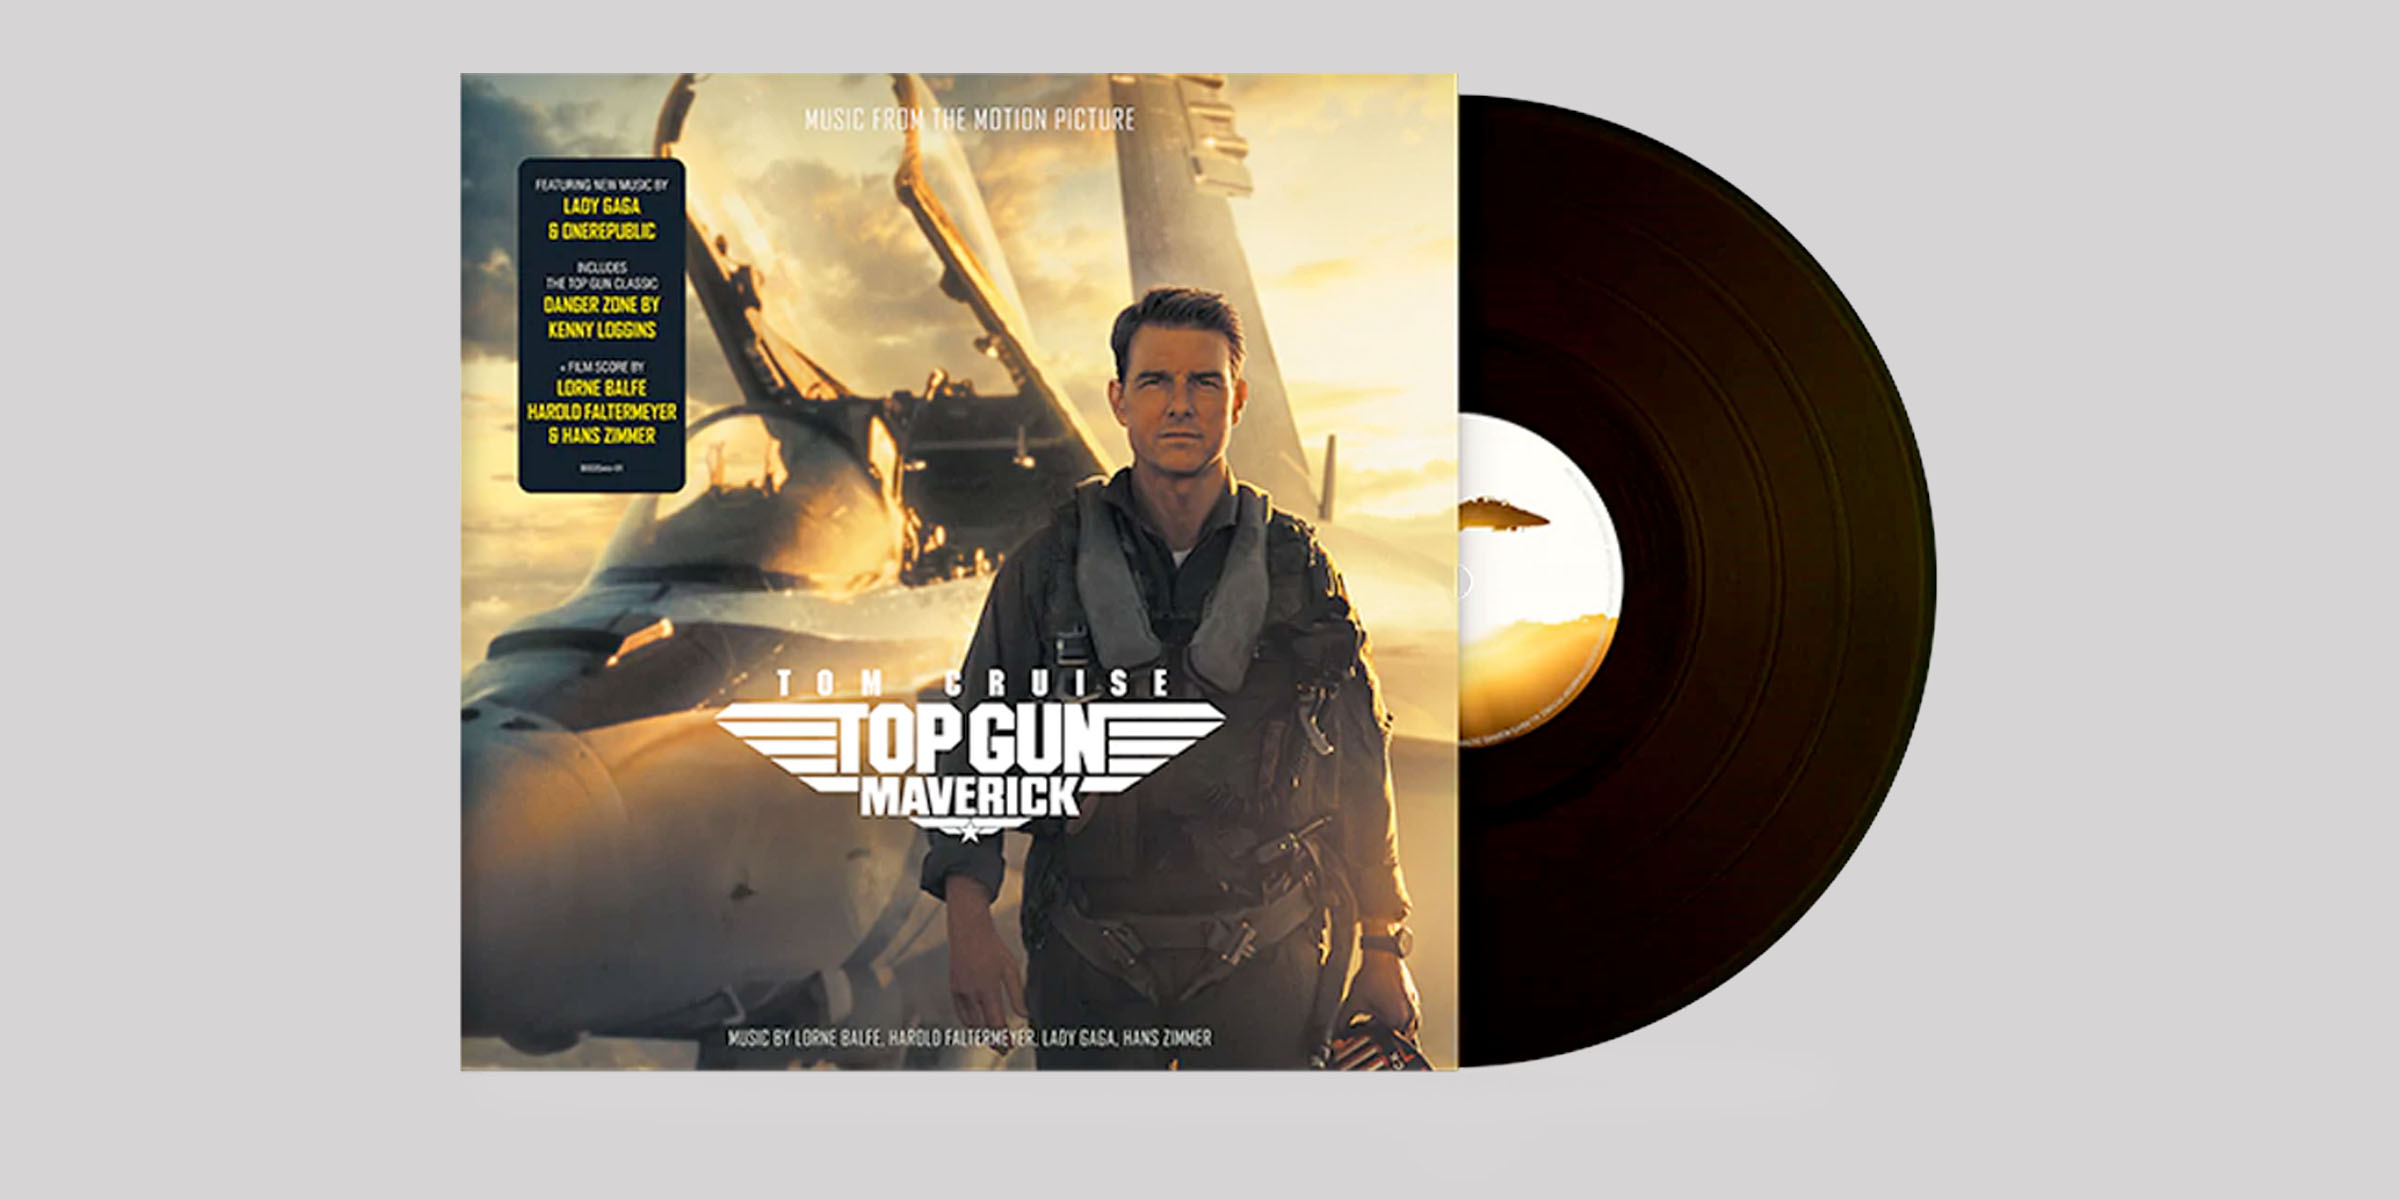 There's no way Lady Gaga can top the soundtrack of the original 'Top Gun